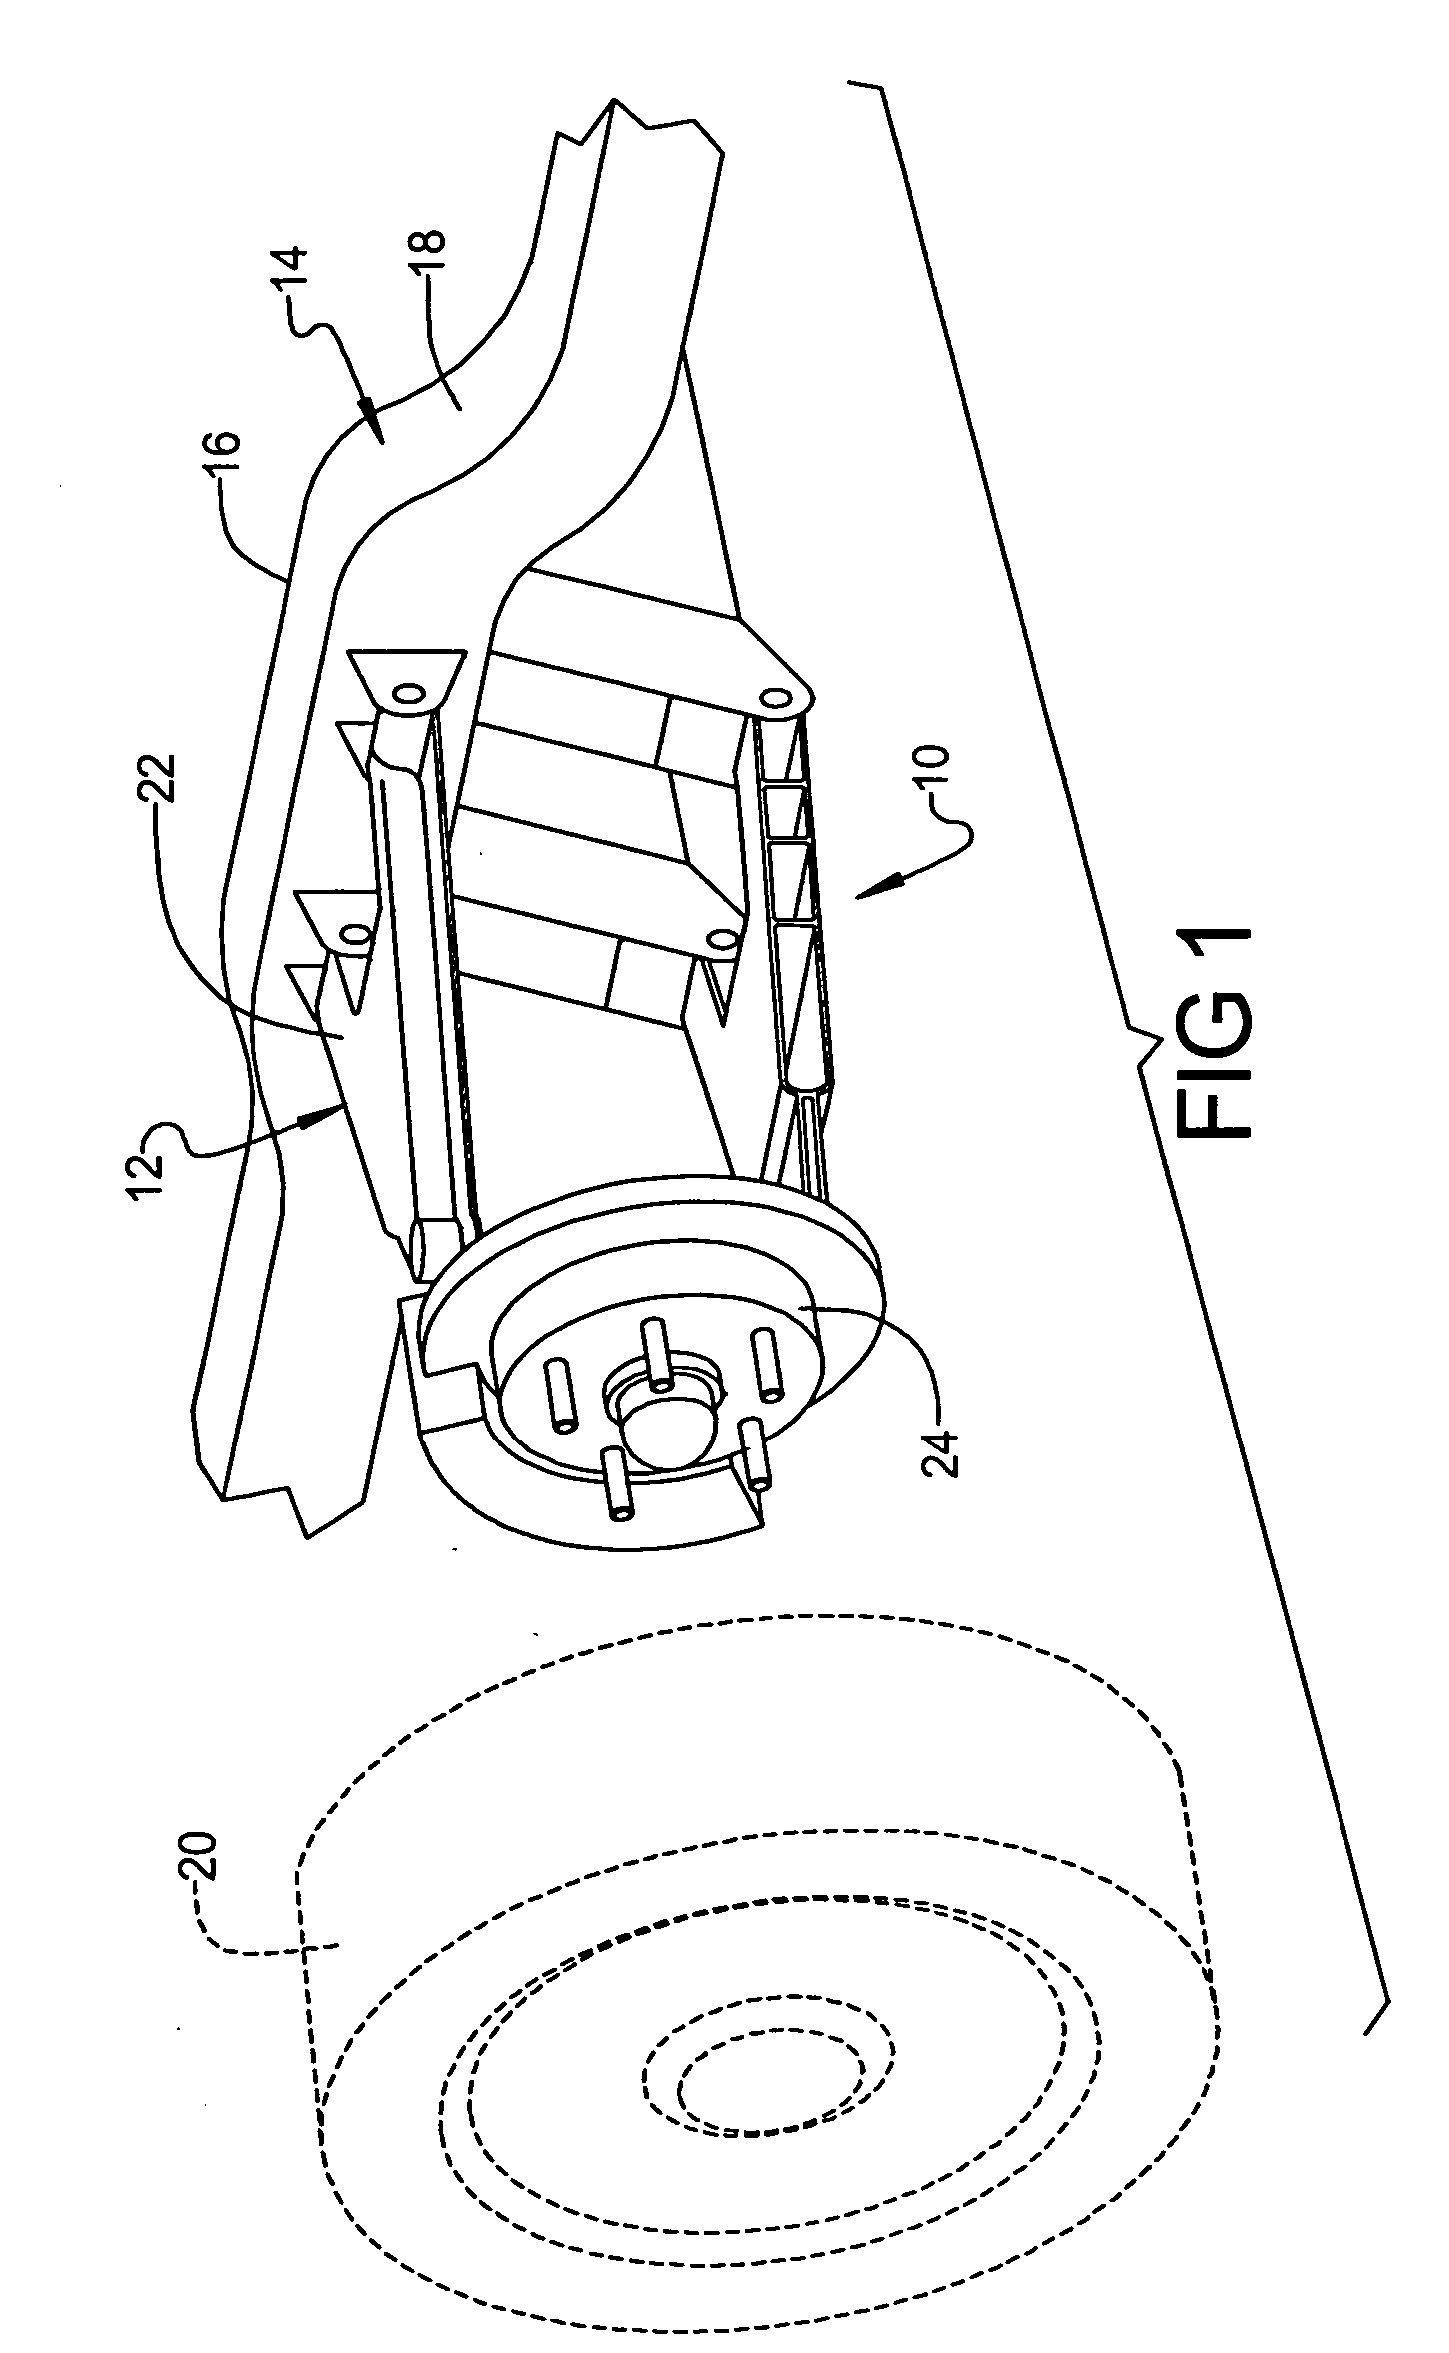 Suspension control arm assembly for vehicles